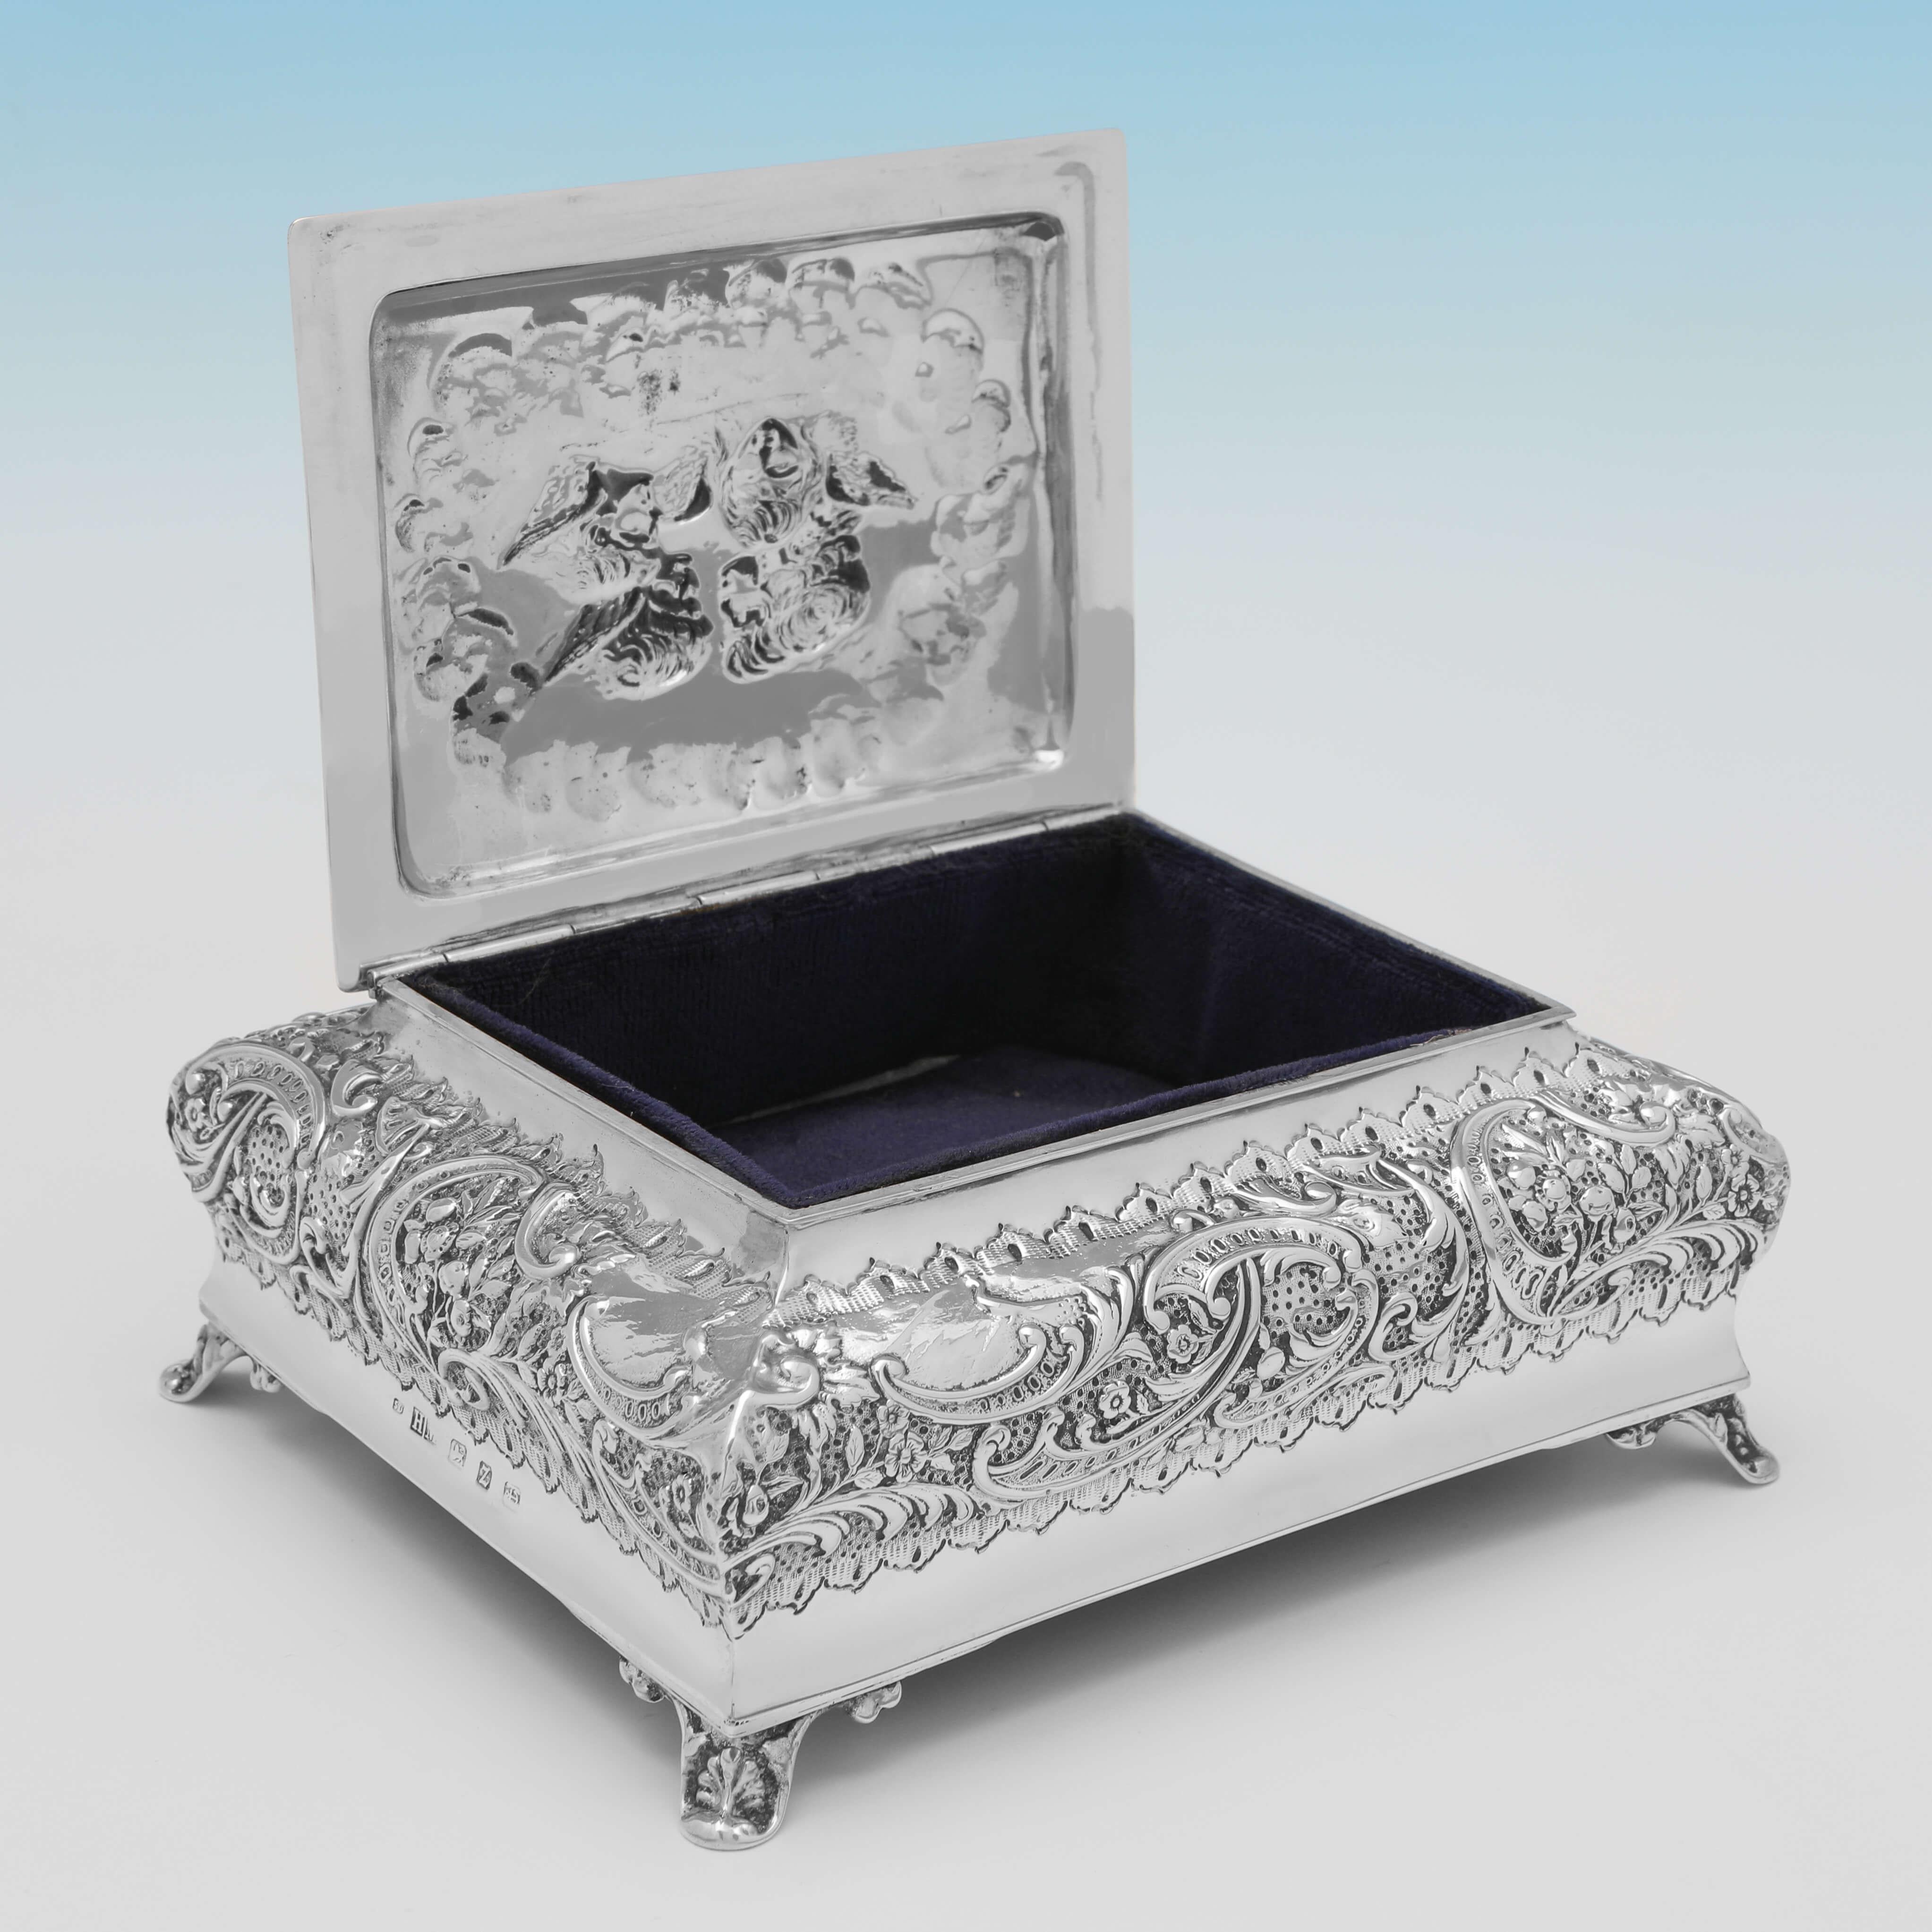 Hallmarked in Birmingham in 1899 by Henry Matthews, this attractive, Victorian, Antique, Sterling Silver Jewellery Box, is lined, and features ornate decoration to the sides, and a representation of the 'Reynolds Angels' on the lid. 

The